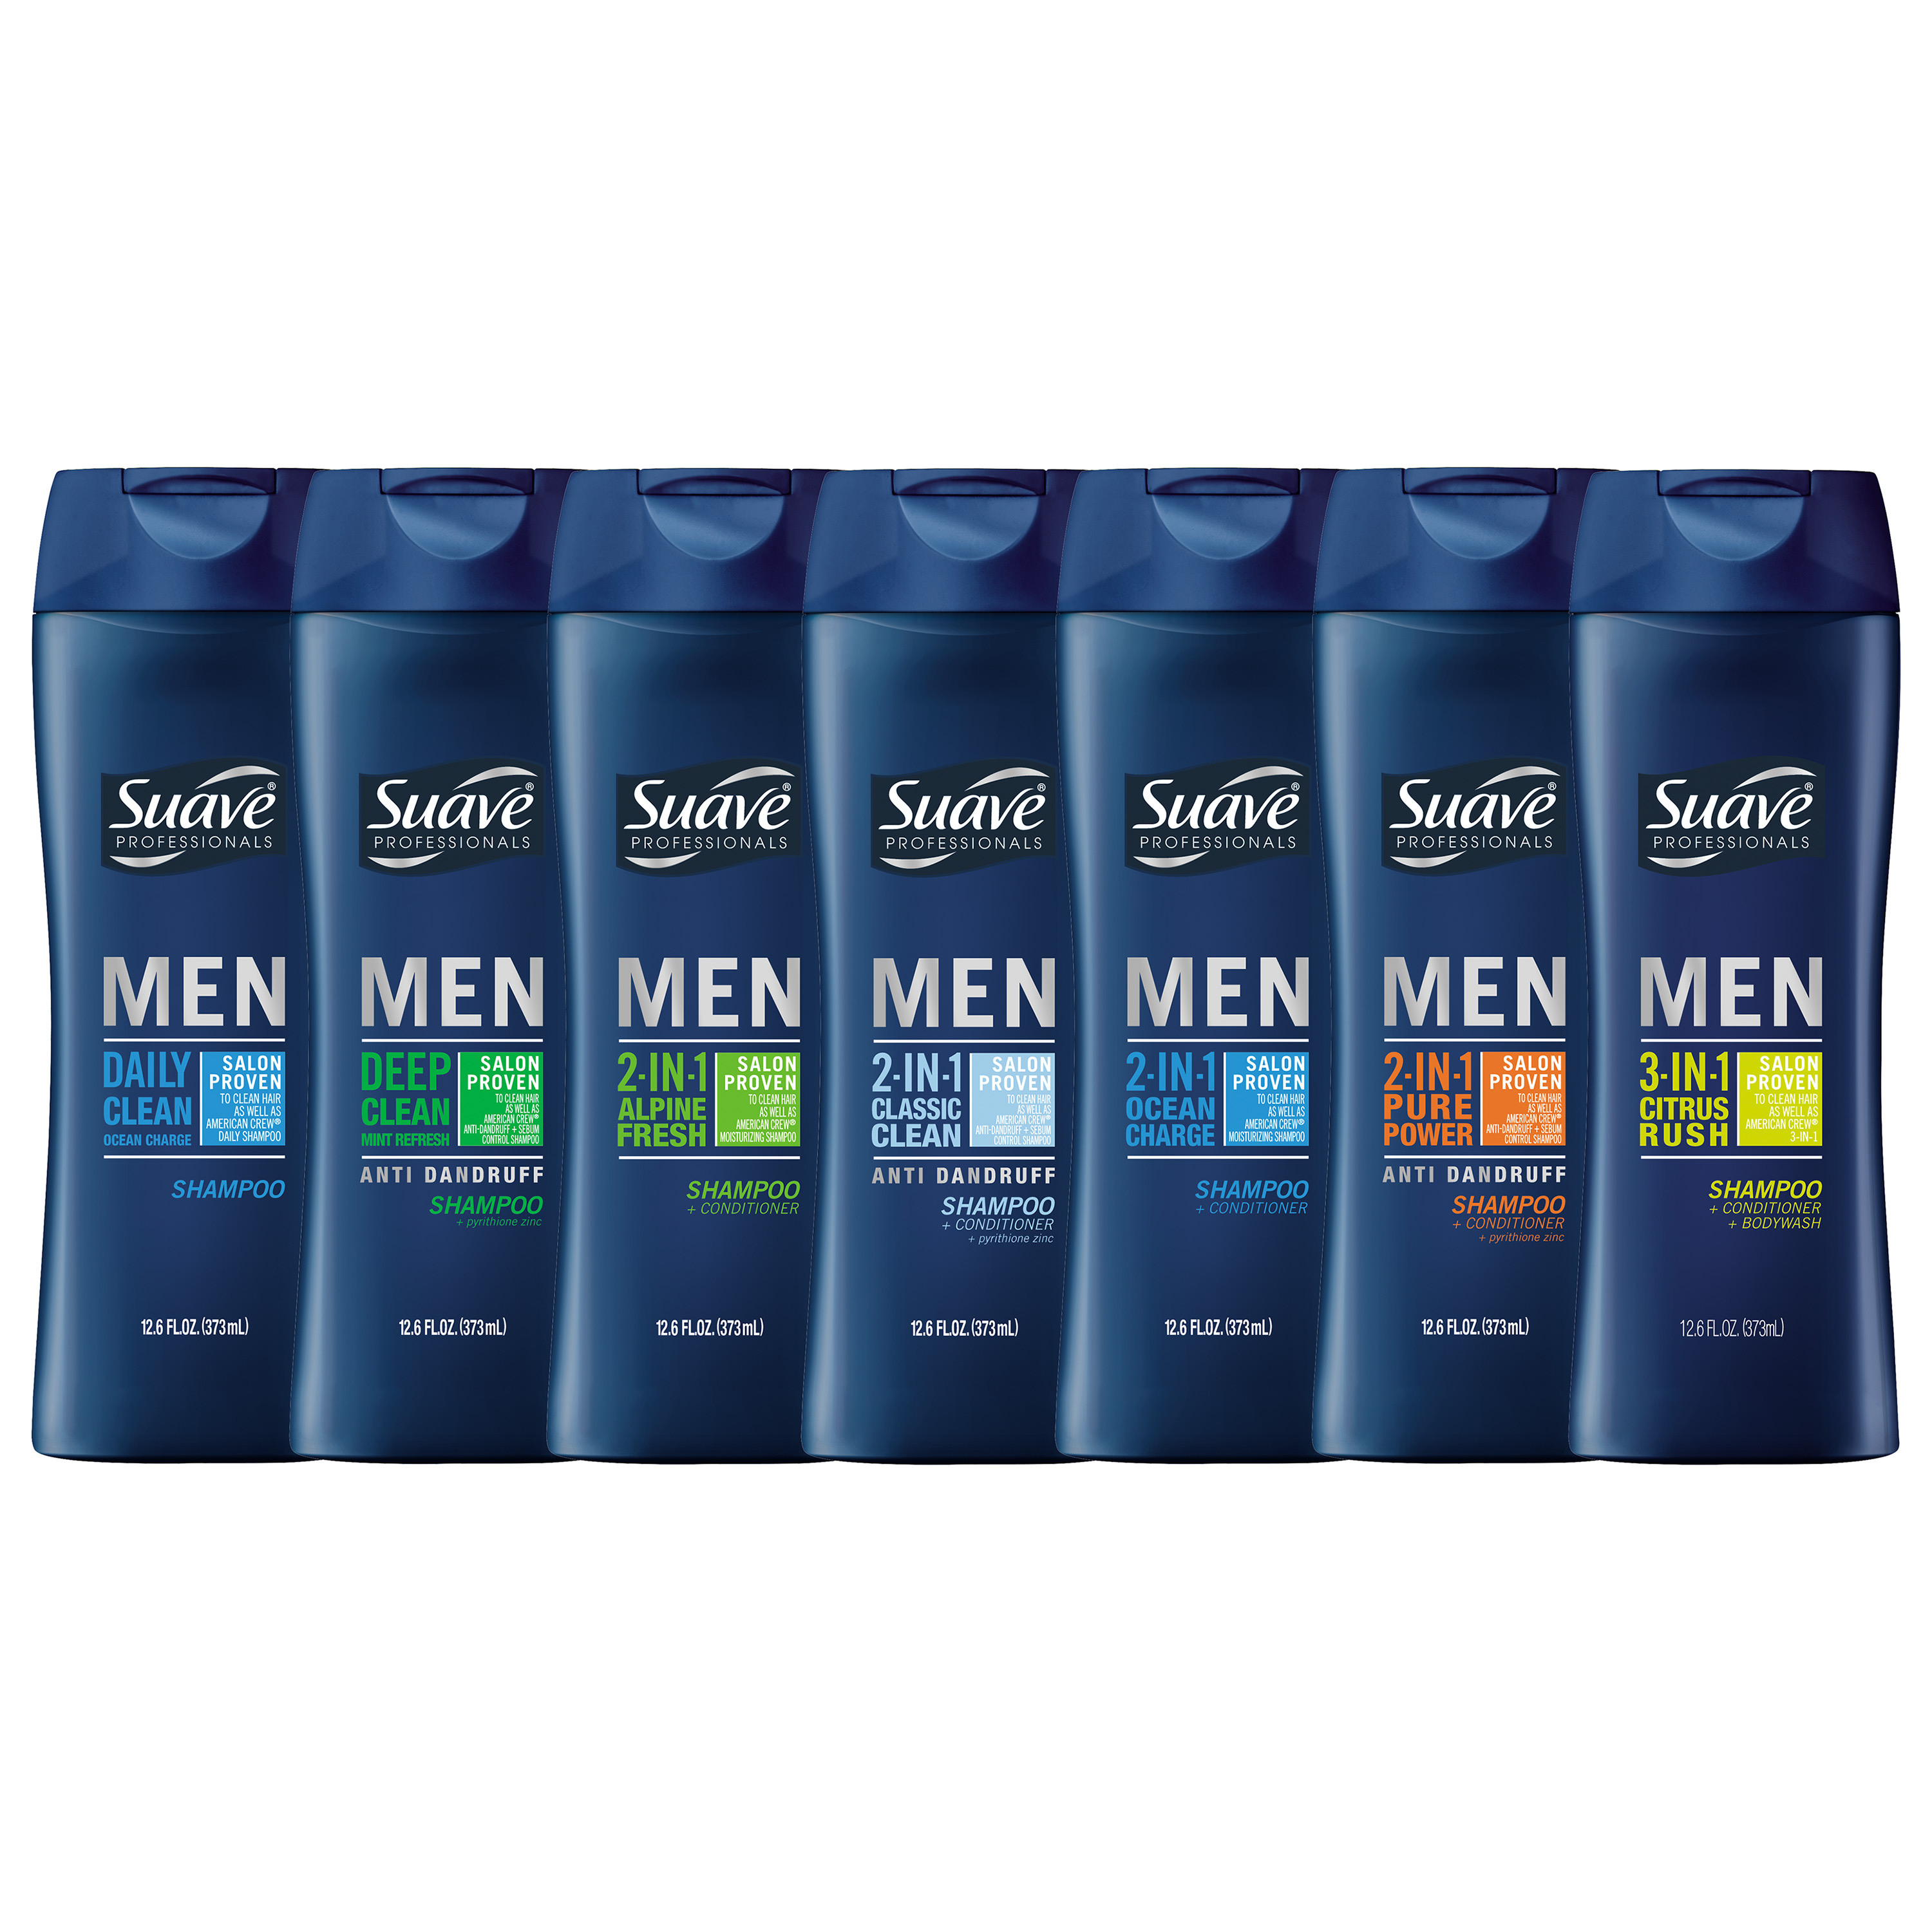 (2 pack) (2 Pack) Suave Men Classic Clean 2in1 AntiDandruff Shampoo & Conditioner, 28 oz - image 4 of 6